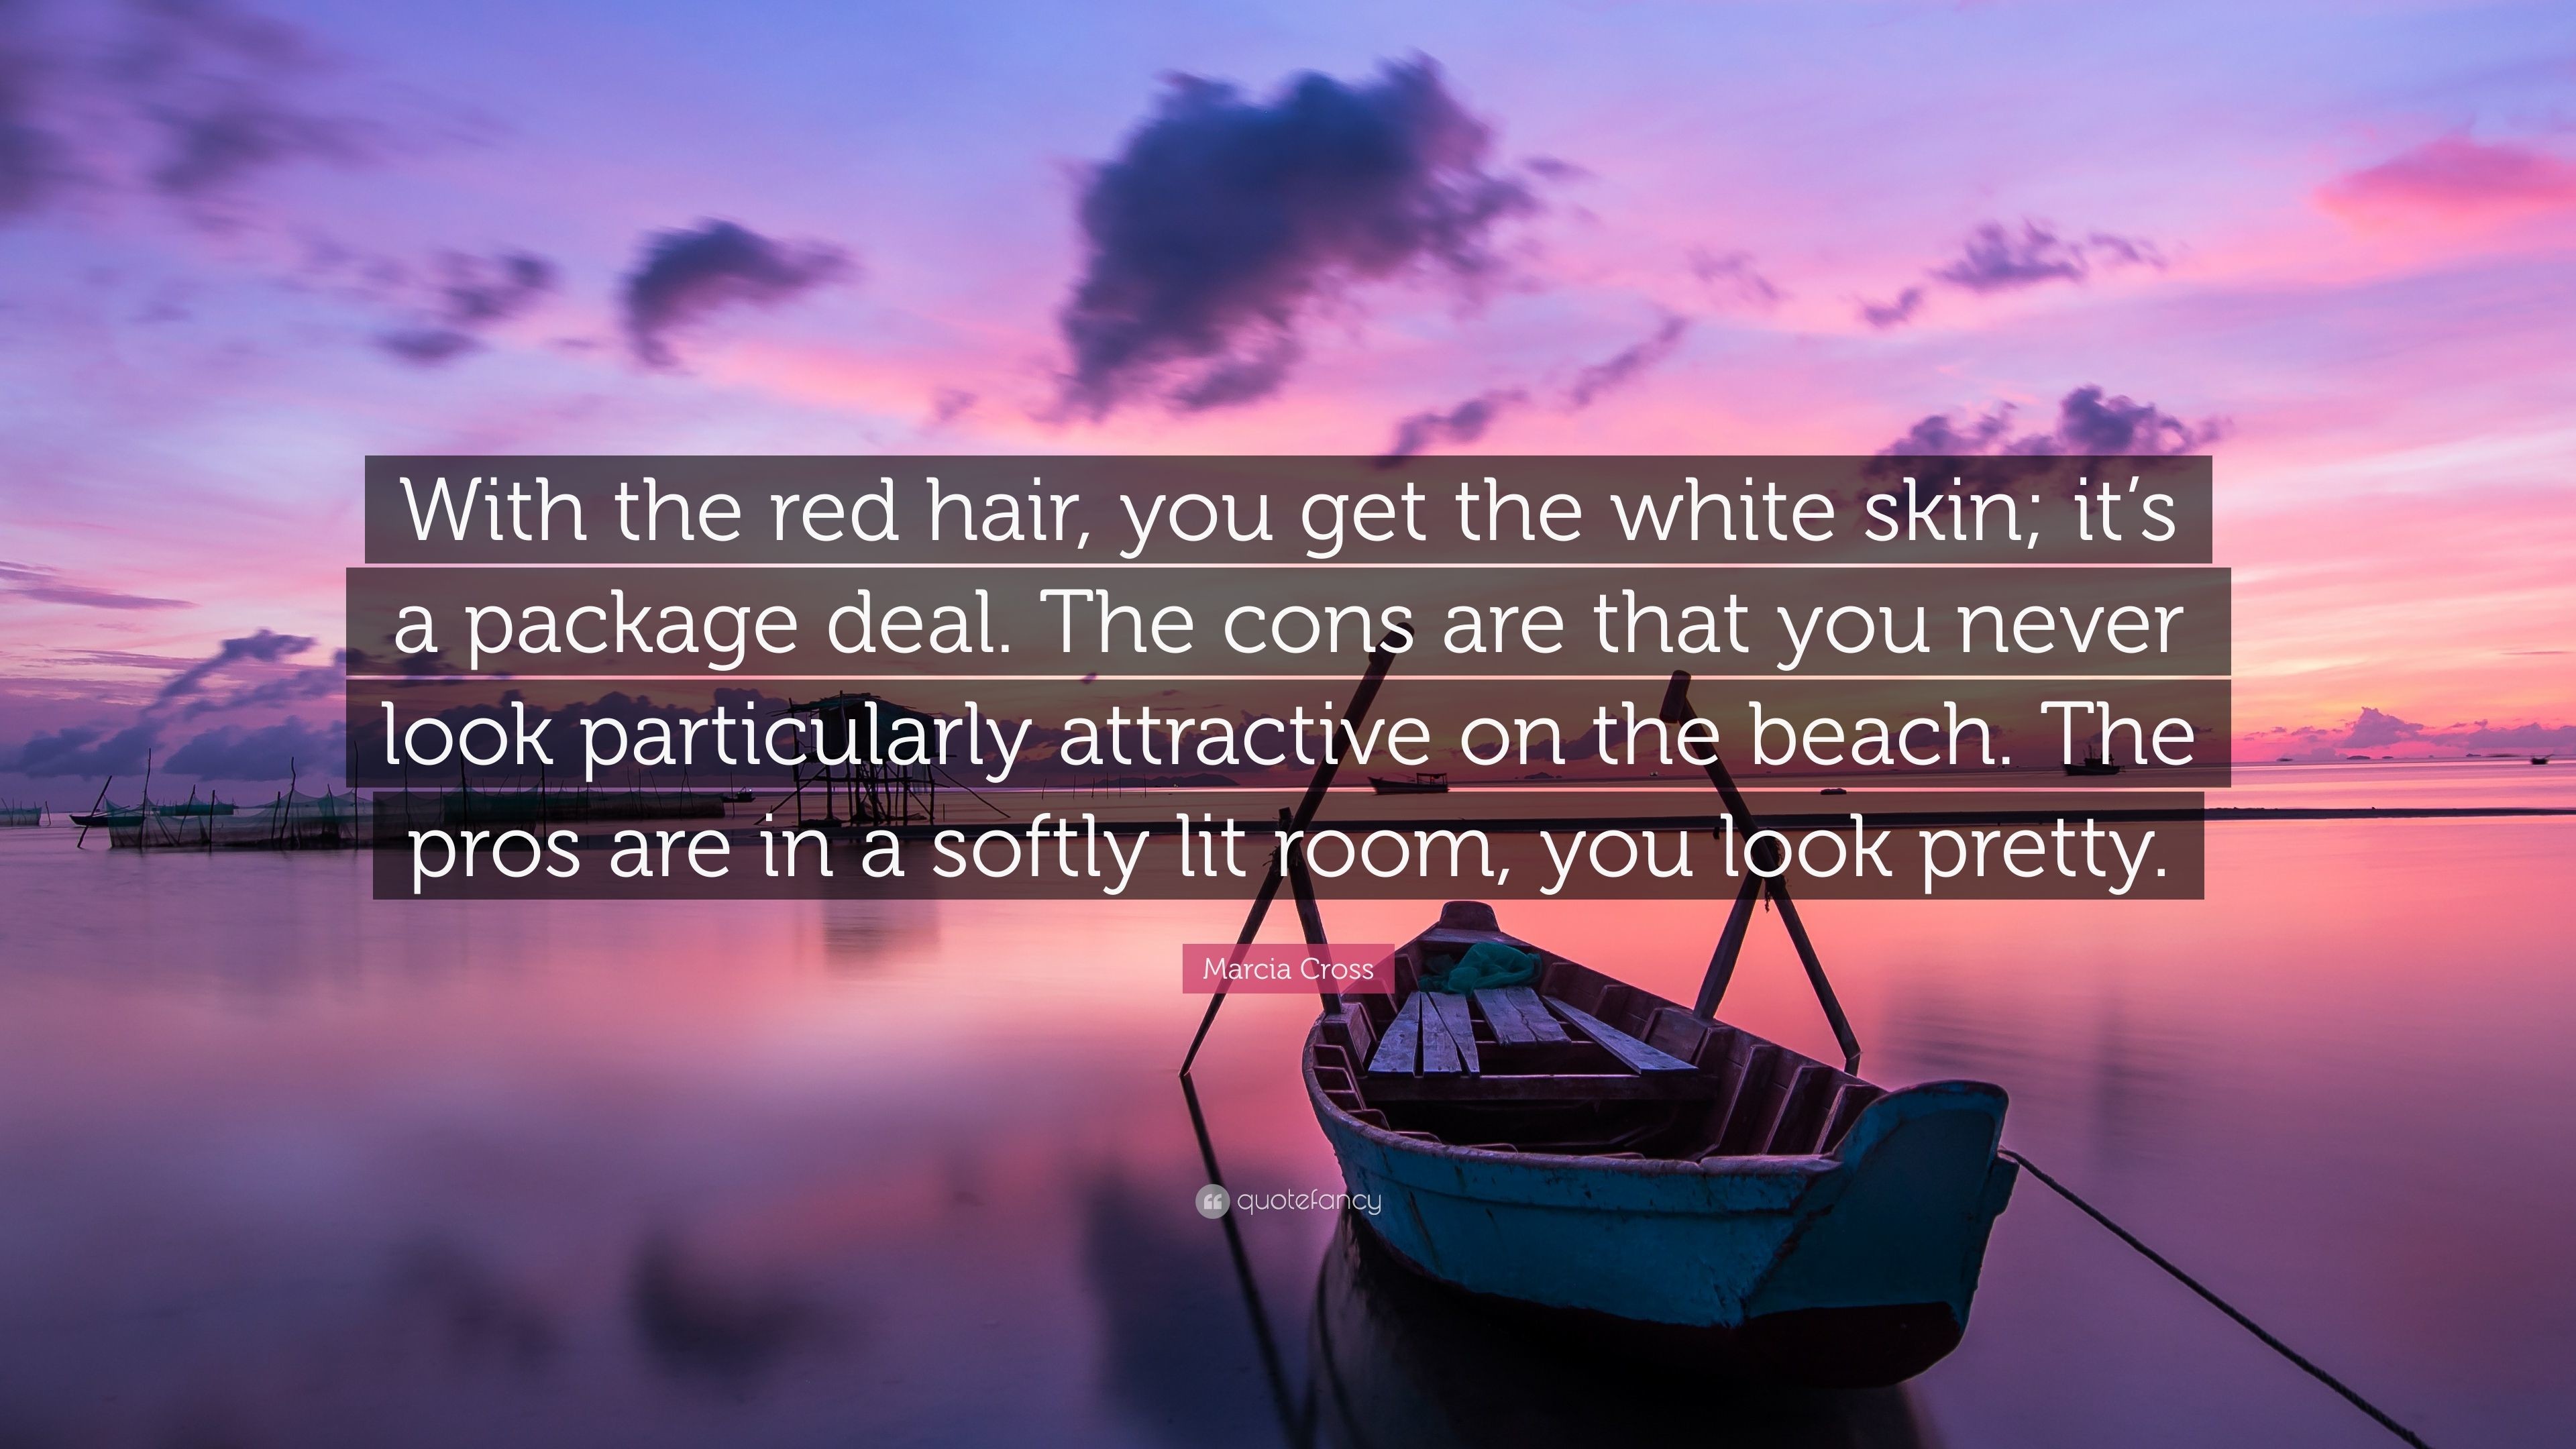 3840x2160 Marcia Cross Quote: “With the red hair, you get the white skin;